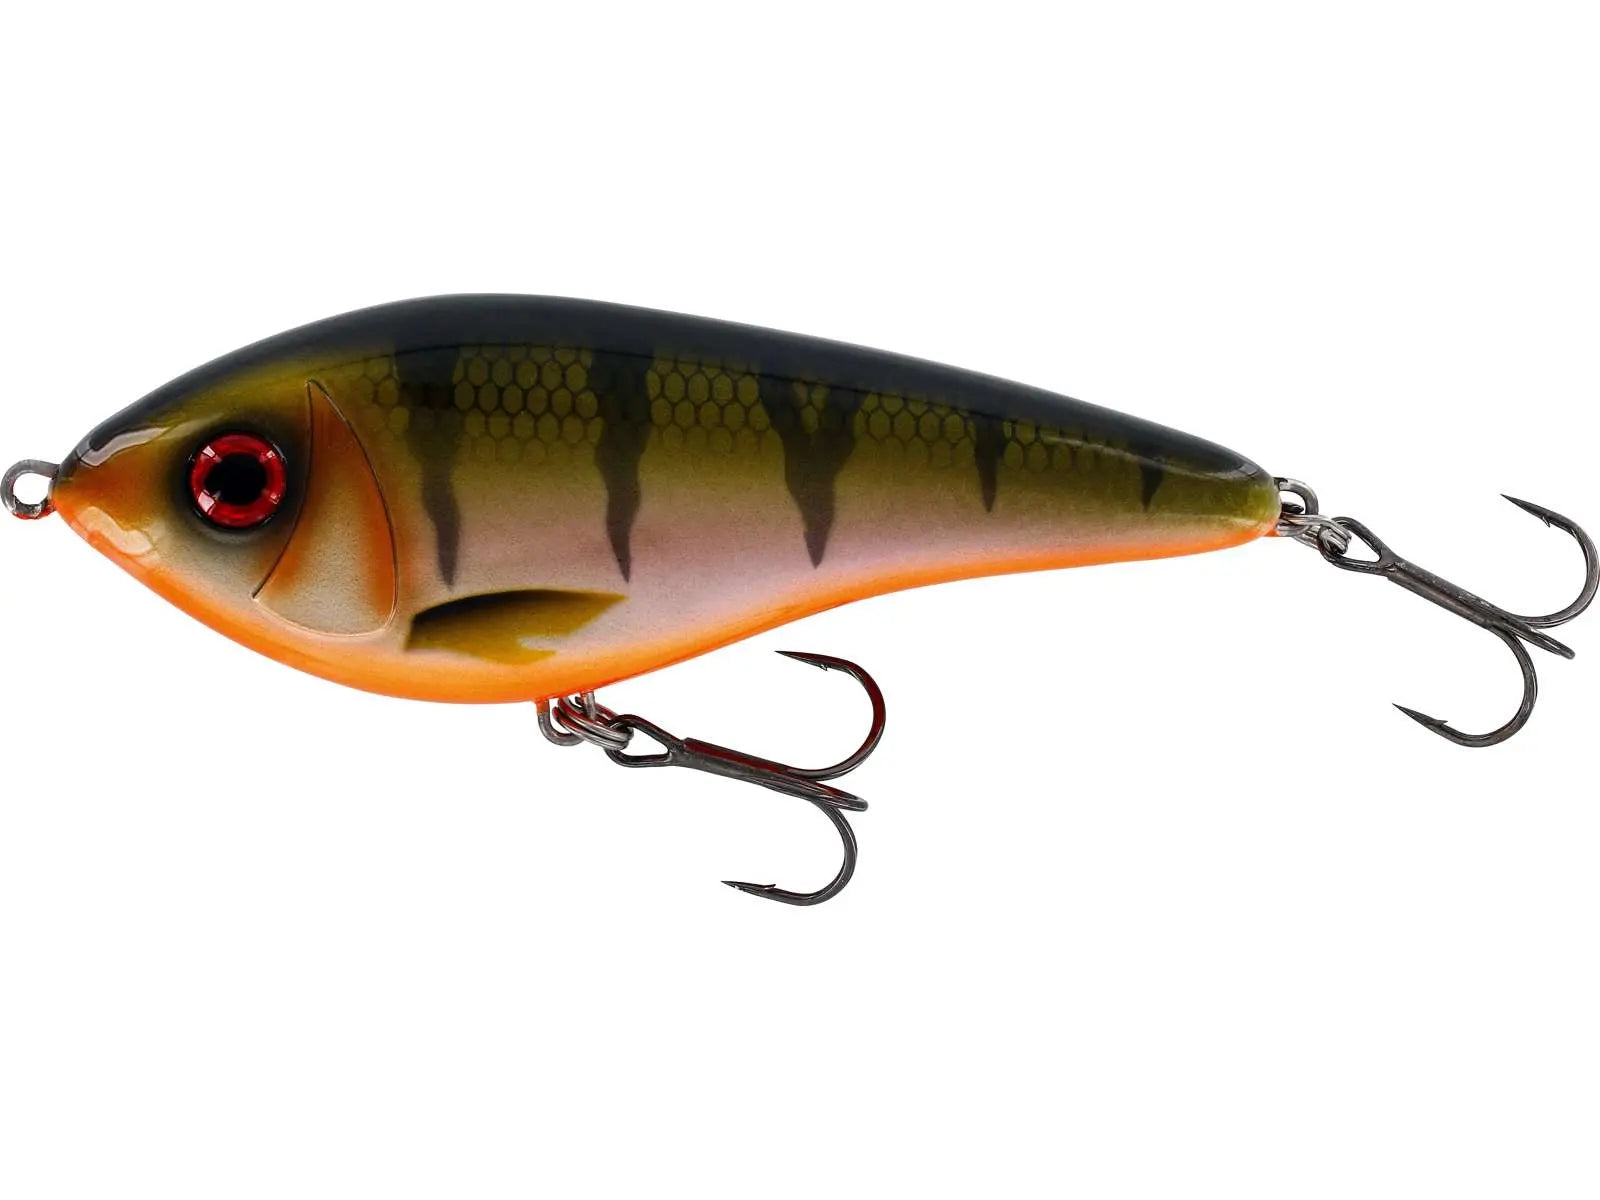 Westin Swim (Suspending/Low Floating) | Rugged Tackle 10cm Low Floating 31g / 3D Golden Perch - Fishing Baits & Lures - Rugged Tackle